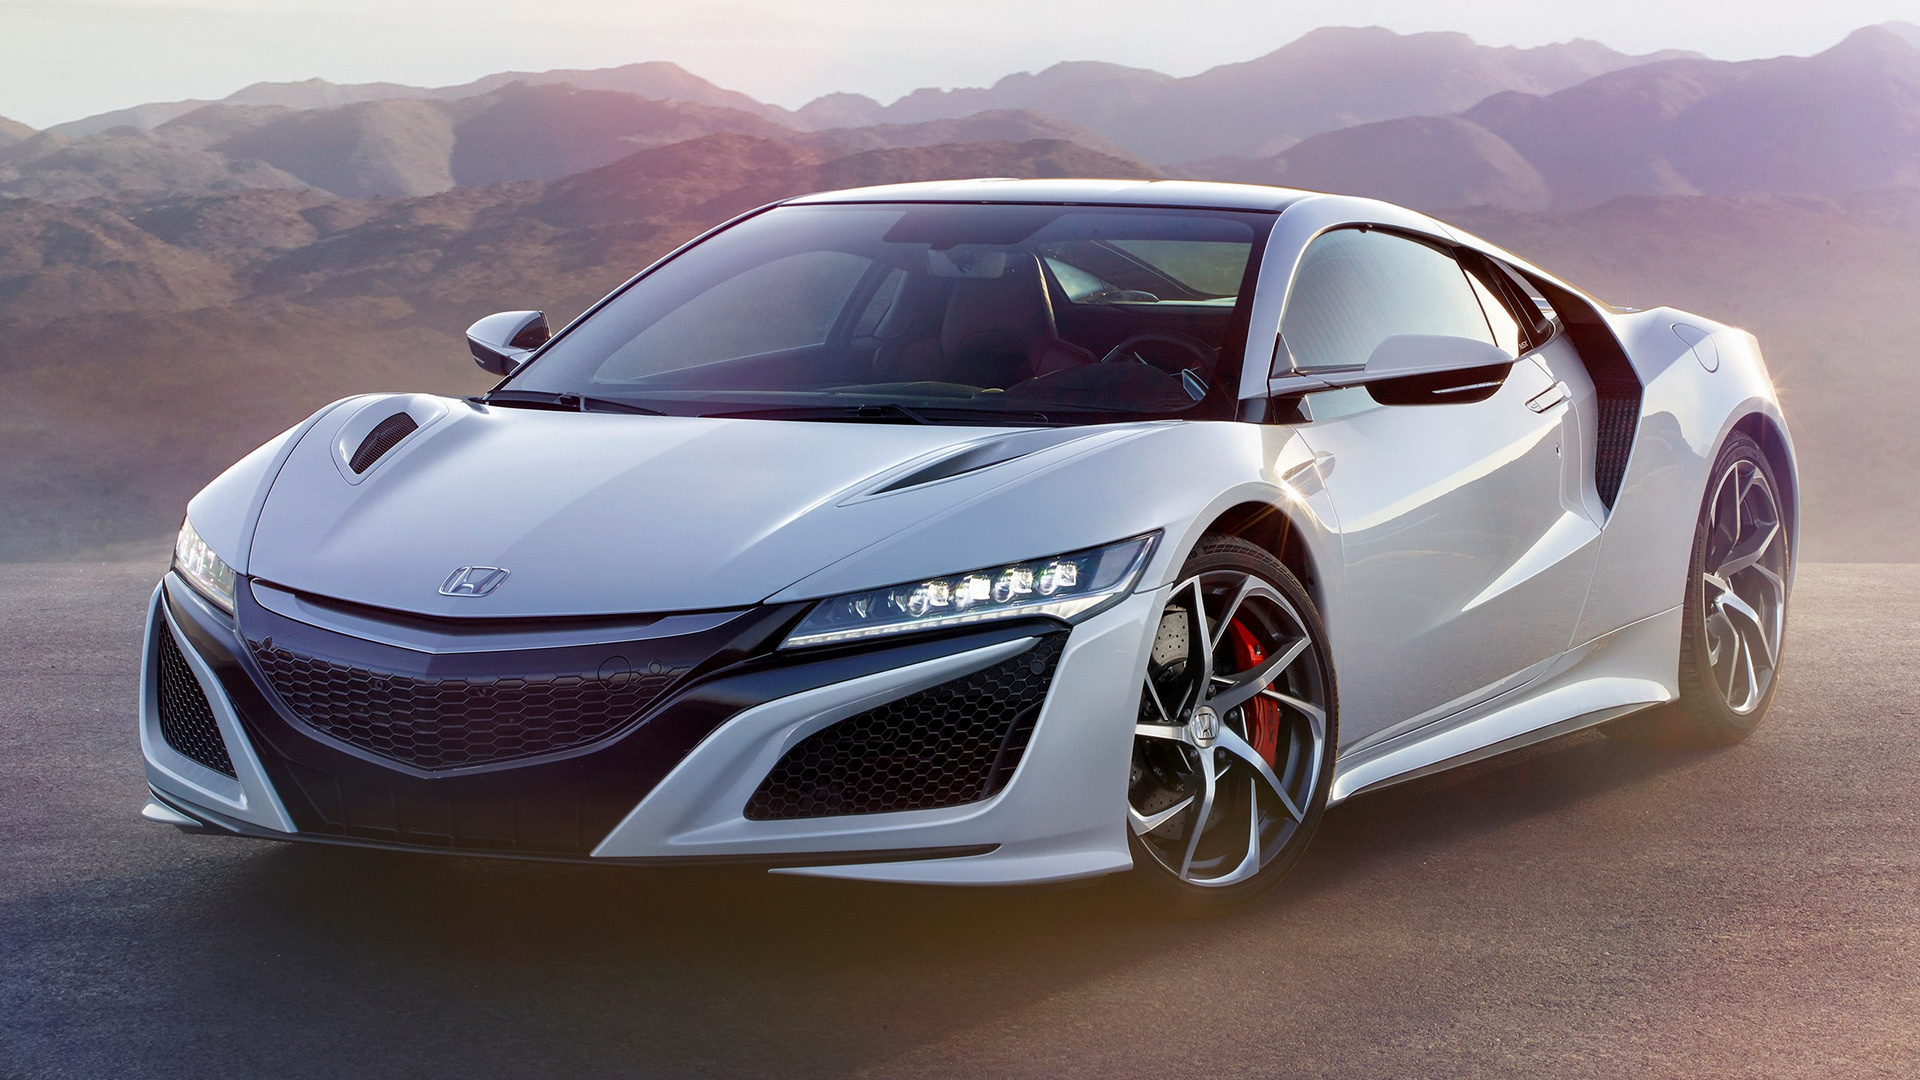 Free Download 2016 Honda Nsx Wallpapers And Hd Images Car Pixel 1920x1080 For Your Desktop Mobile Tablet Explore 30 Honda Nsx Wallpapers Honda Nsx Wallpapers Honda Nsx Wallpaper Acura Nsx Wallpapers